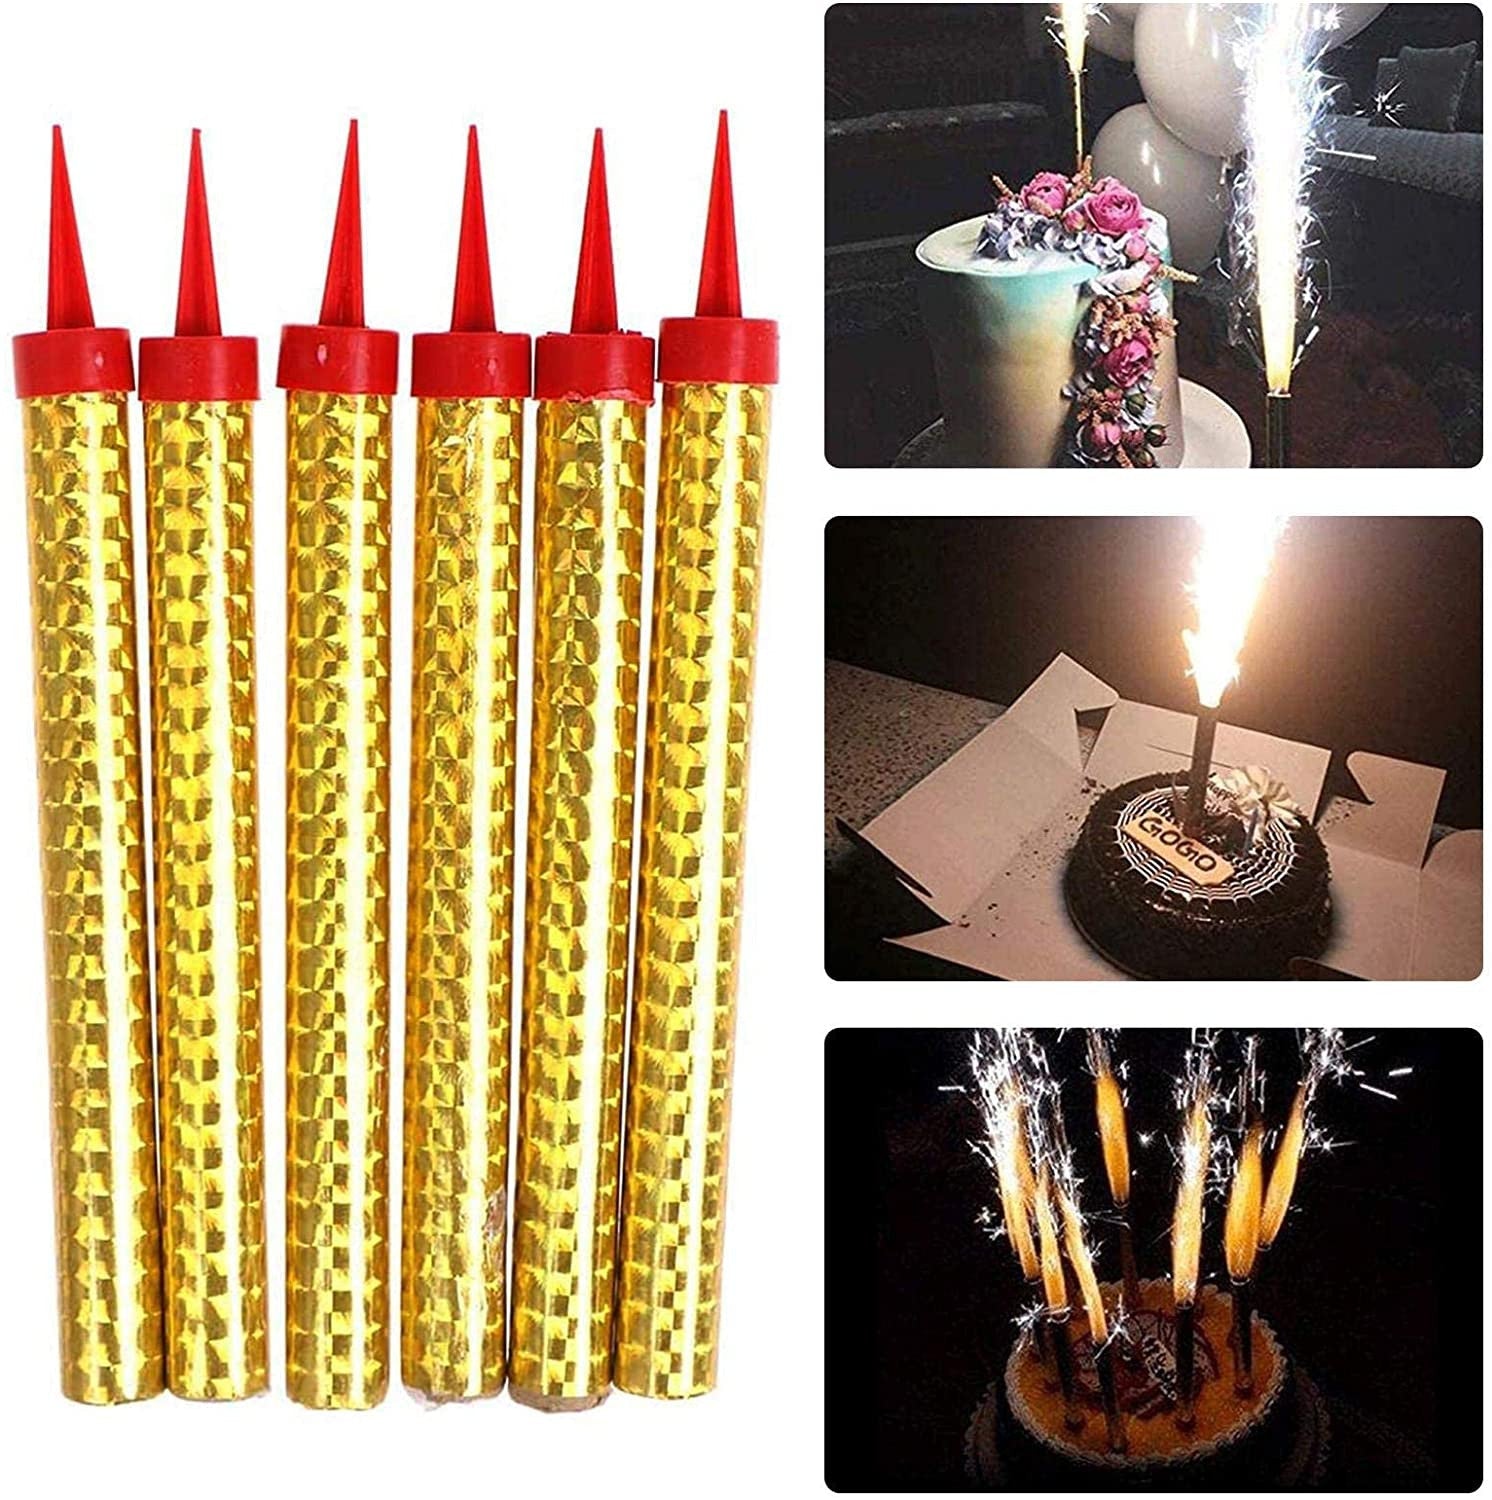 Candle Party Kit